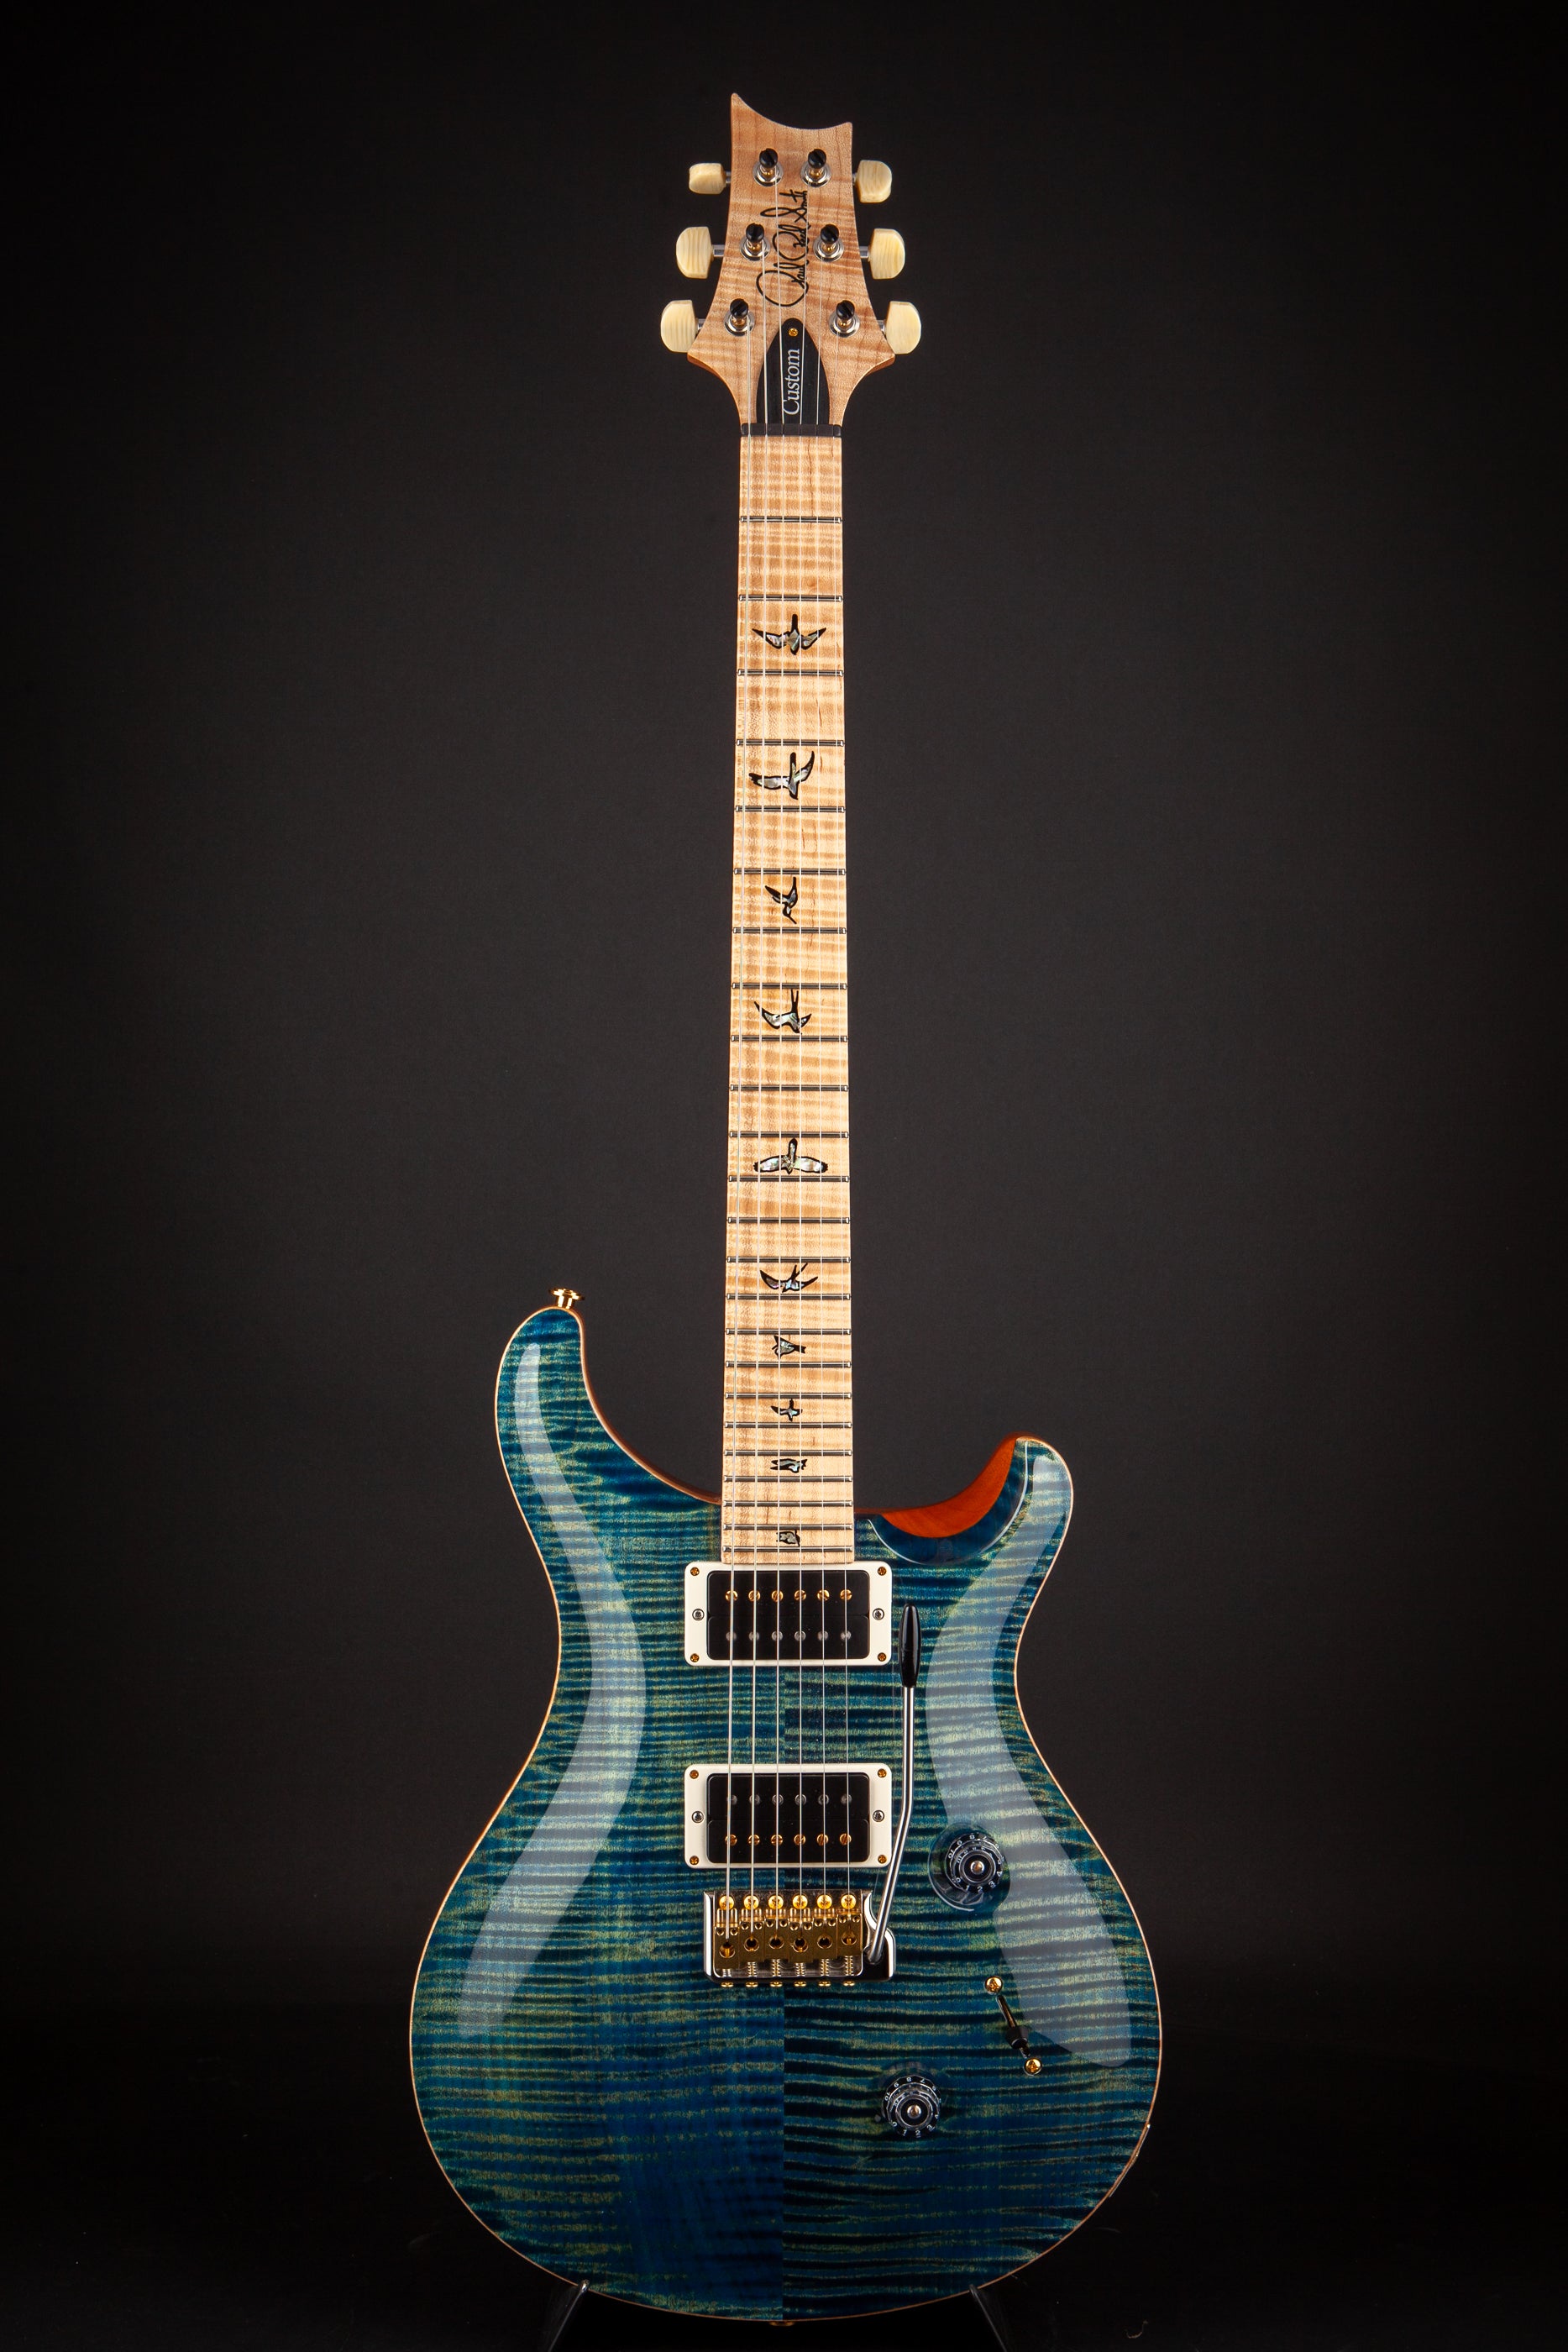 PRS Guitars: Custom 24 10-Top Limited Flame Maple Neck River Blue #243517